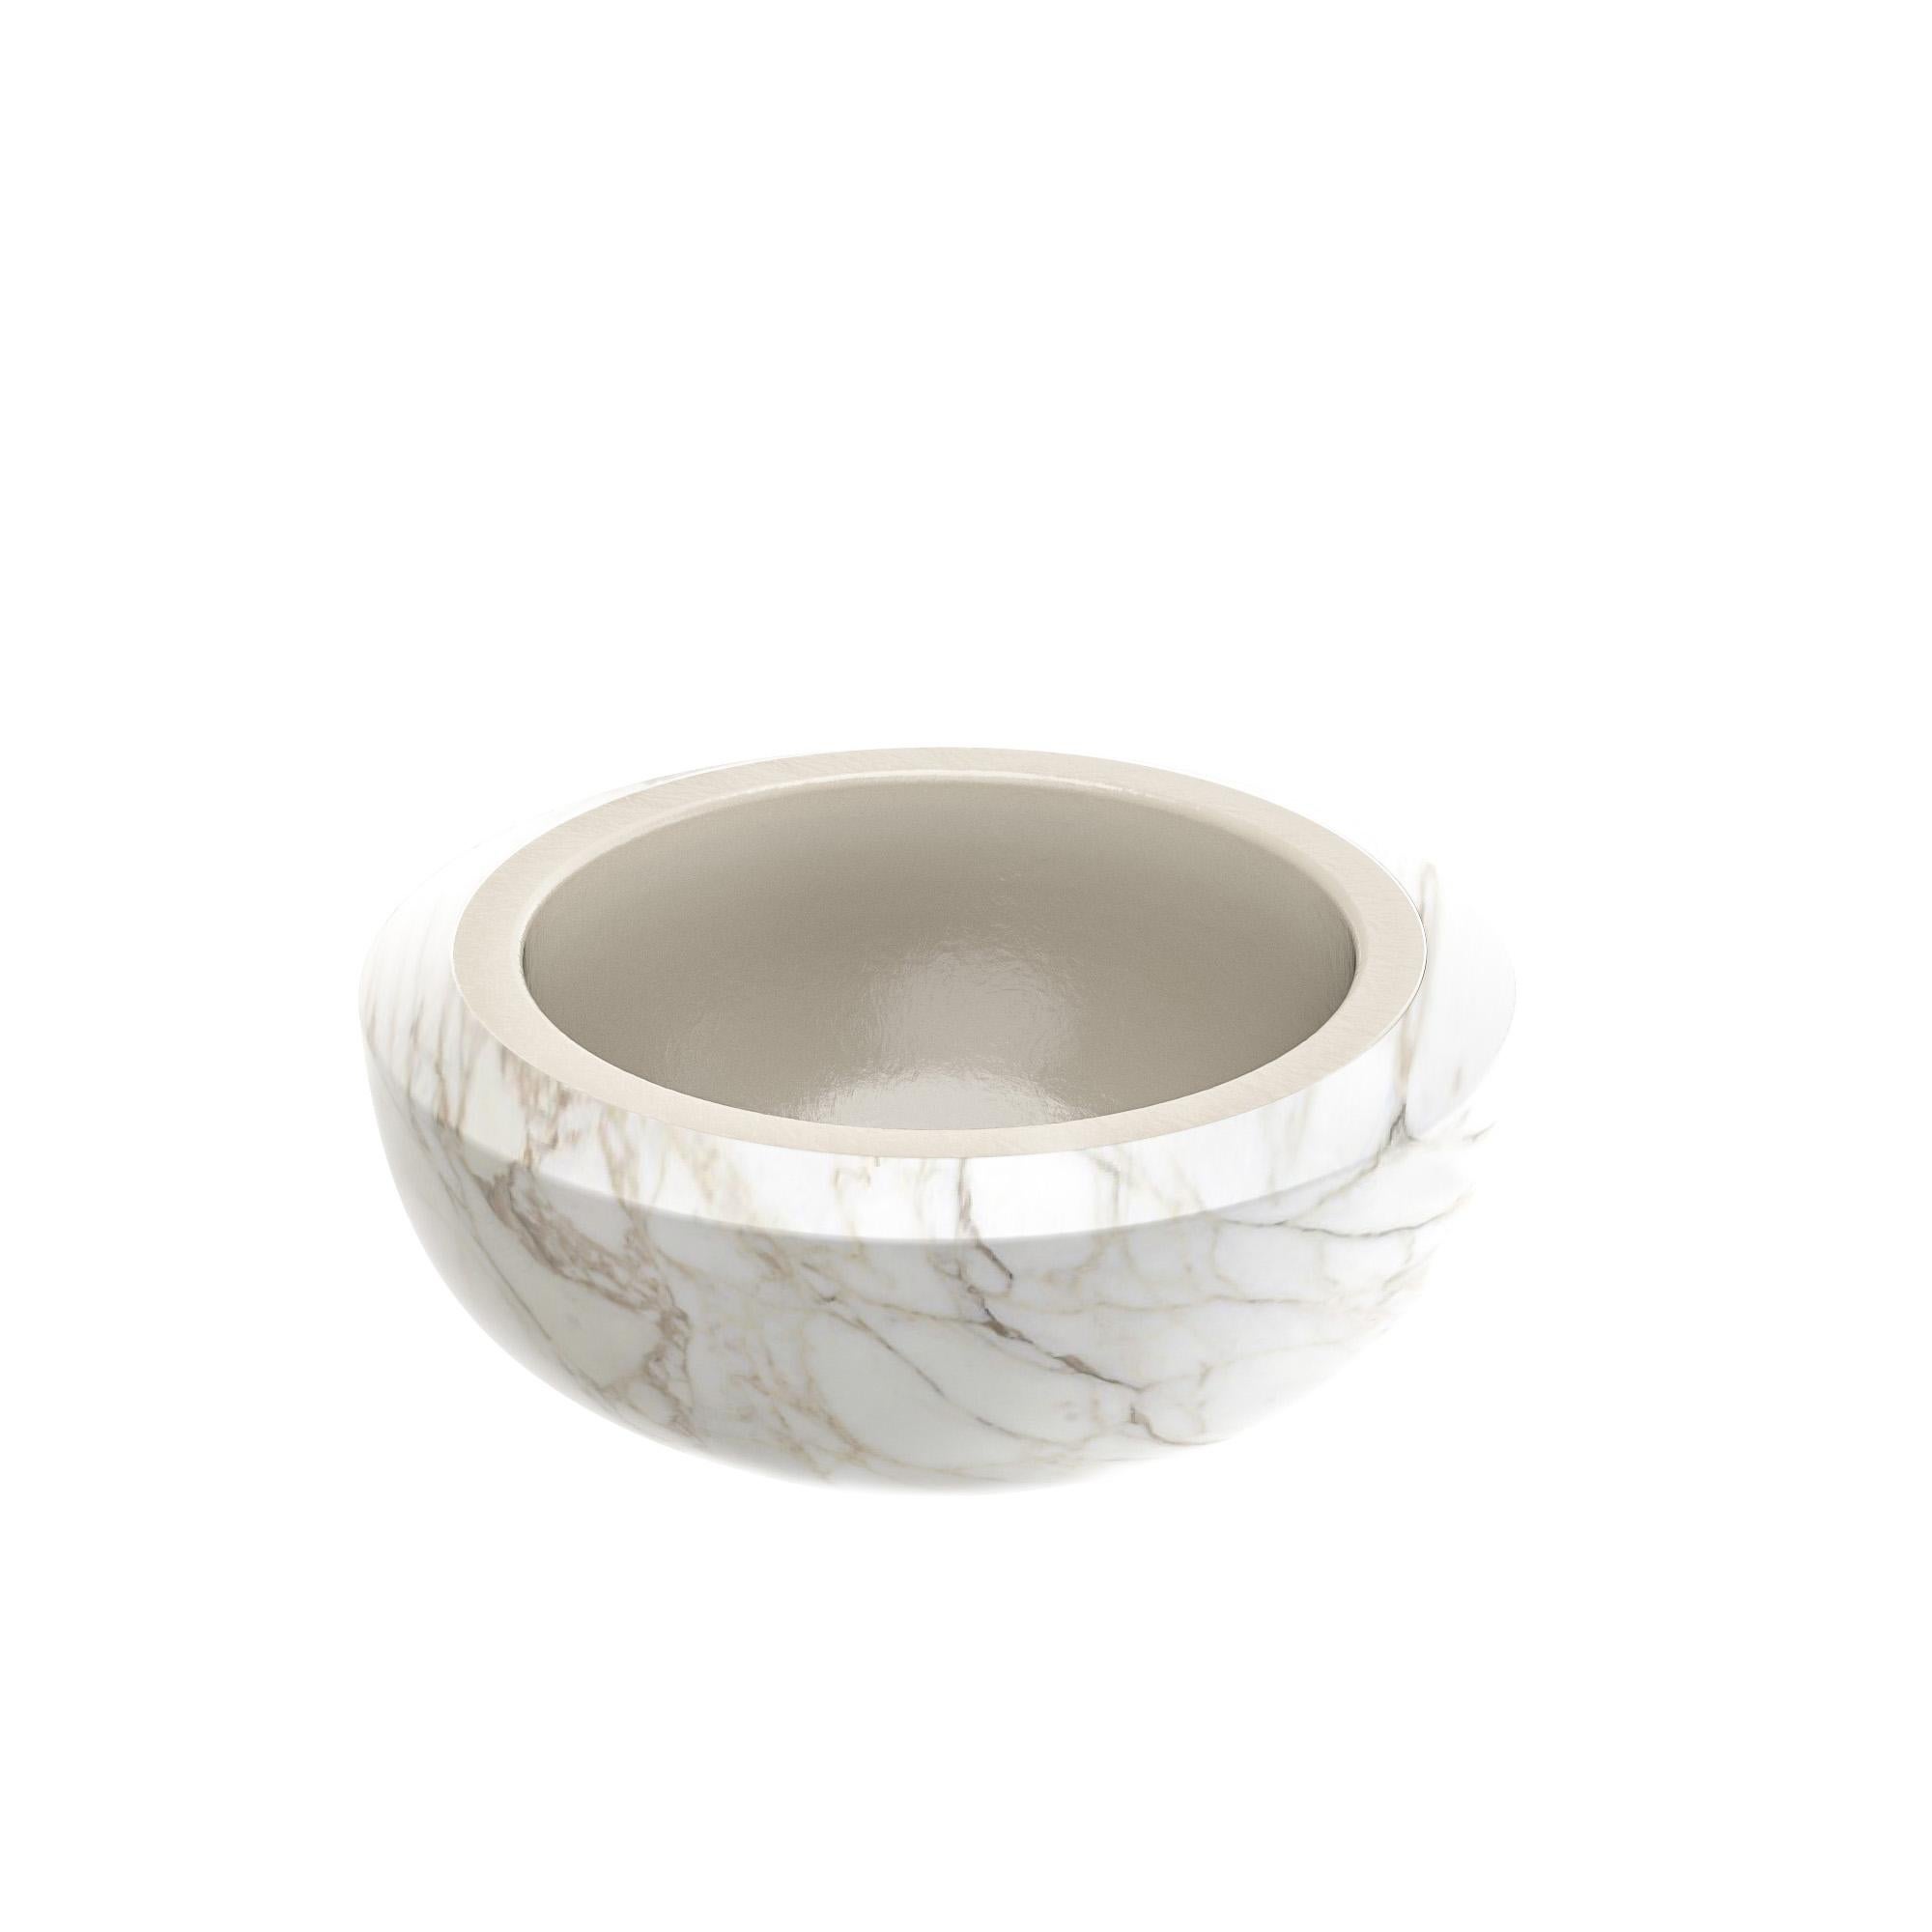 Cup washbasin by Marmi Serafini
Materials: Calacatta Vagli Oro marble, resin.
Dimensions: D 50 x H 20 cm
Available in other marbles.
Tap not included.

A strong yet elegant basin, match to even the most elegant bathrooms.
The thick rim, made